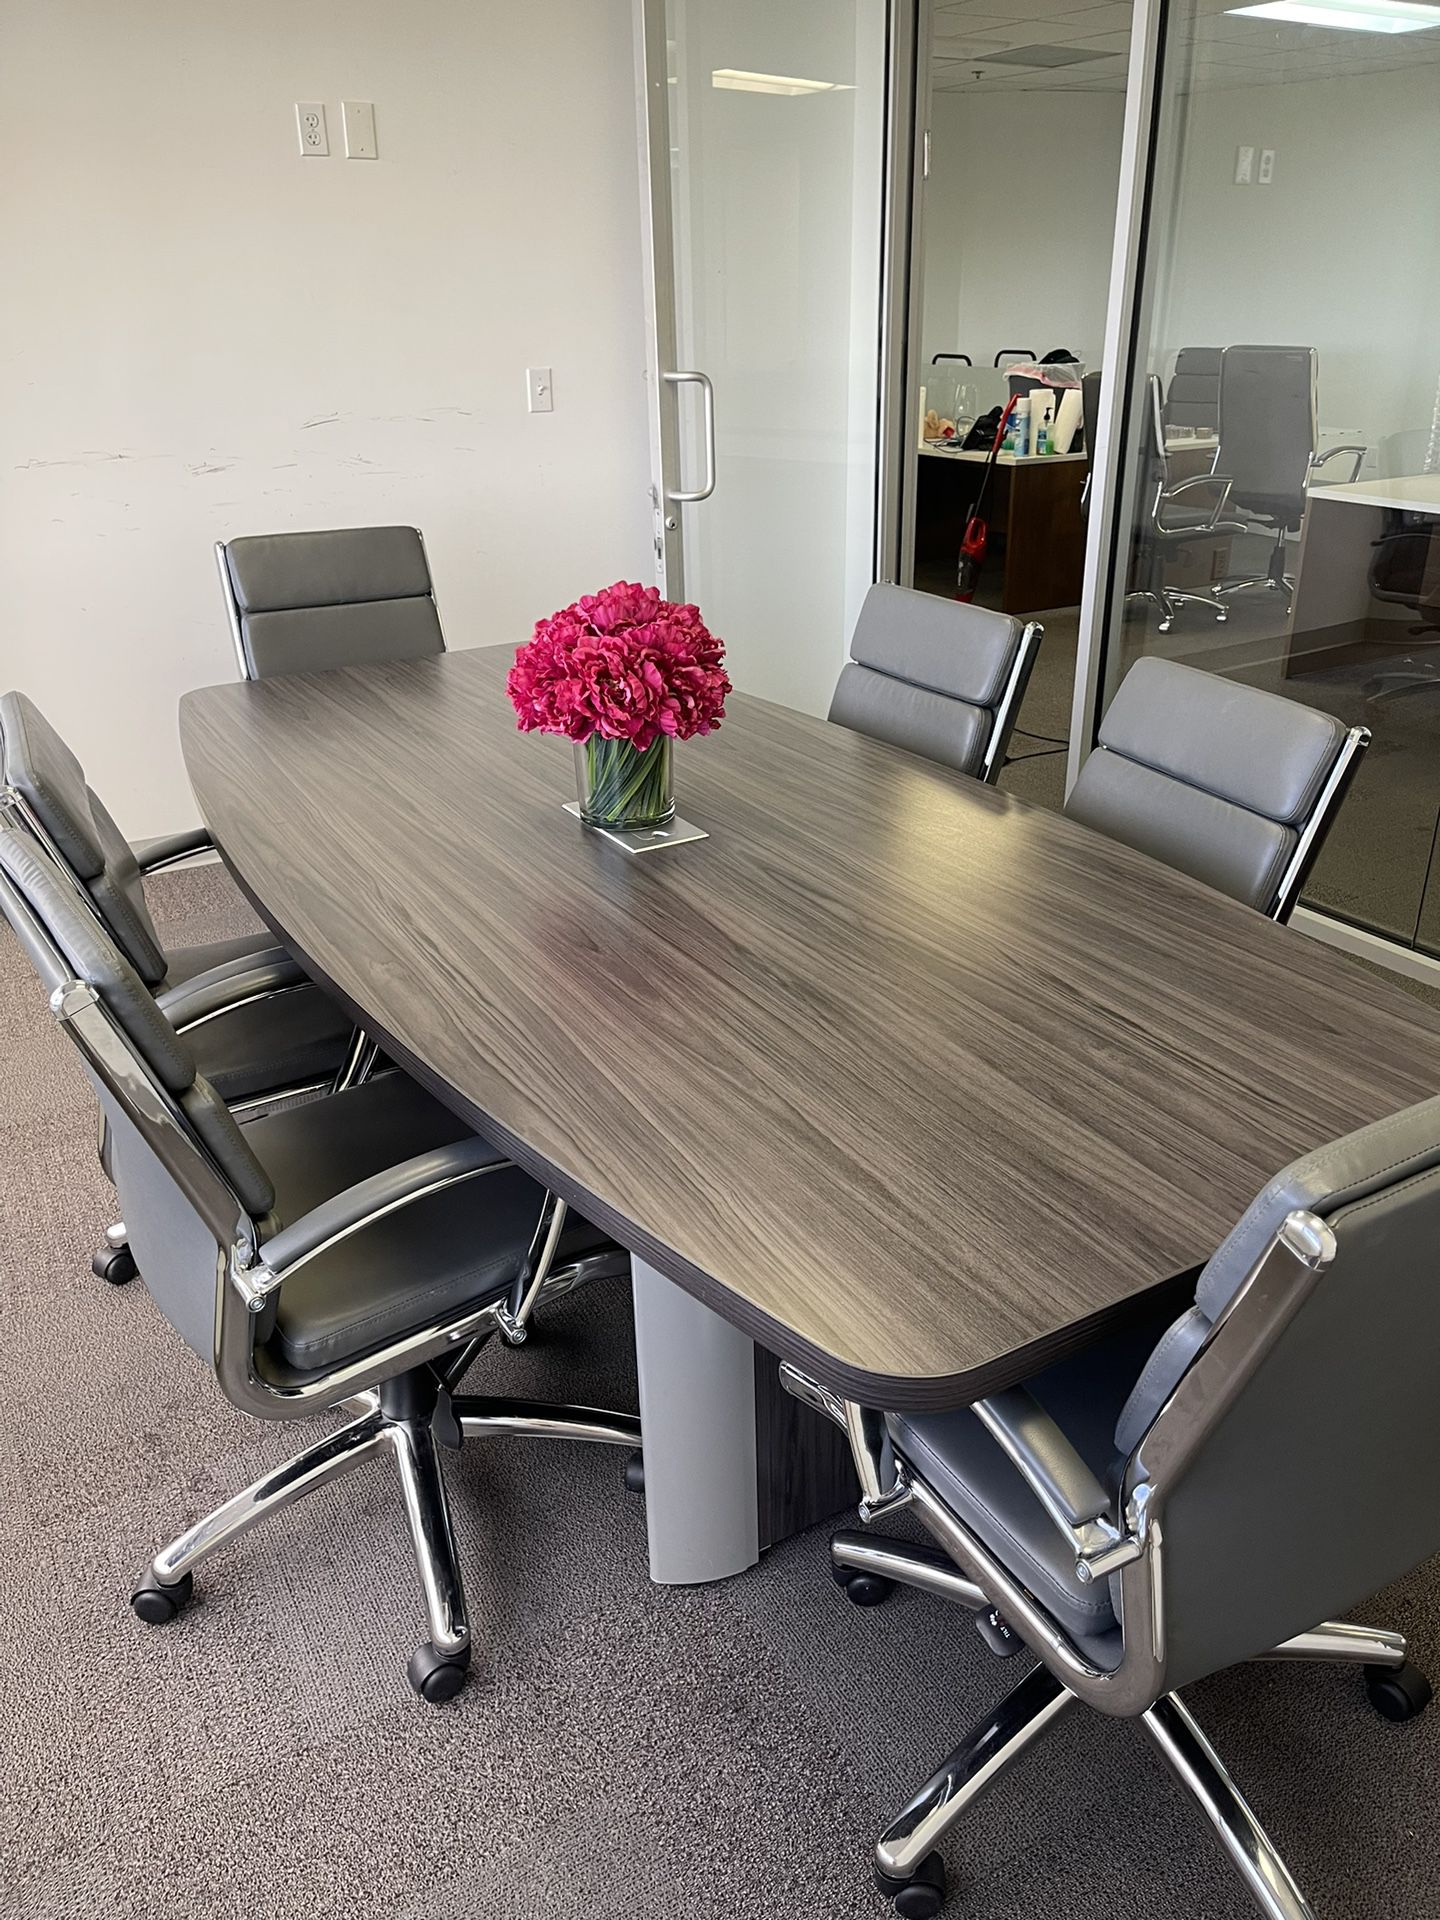 Conference Room table & 6 Chairs (other Office Furniture In Description) 